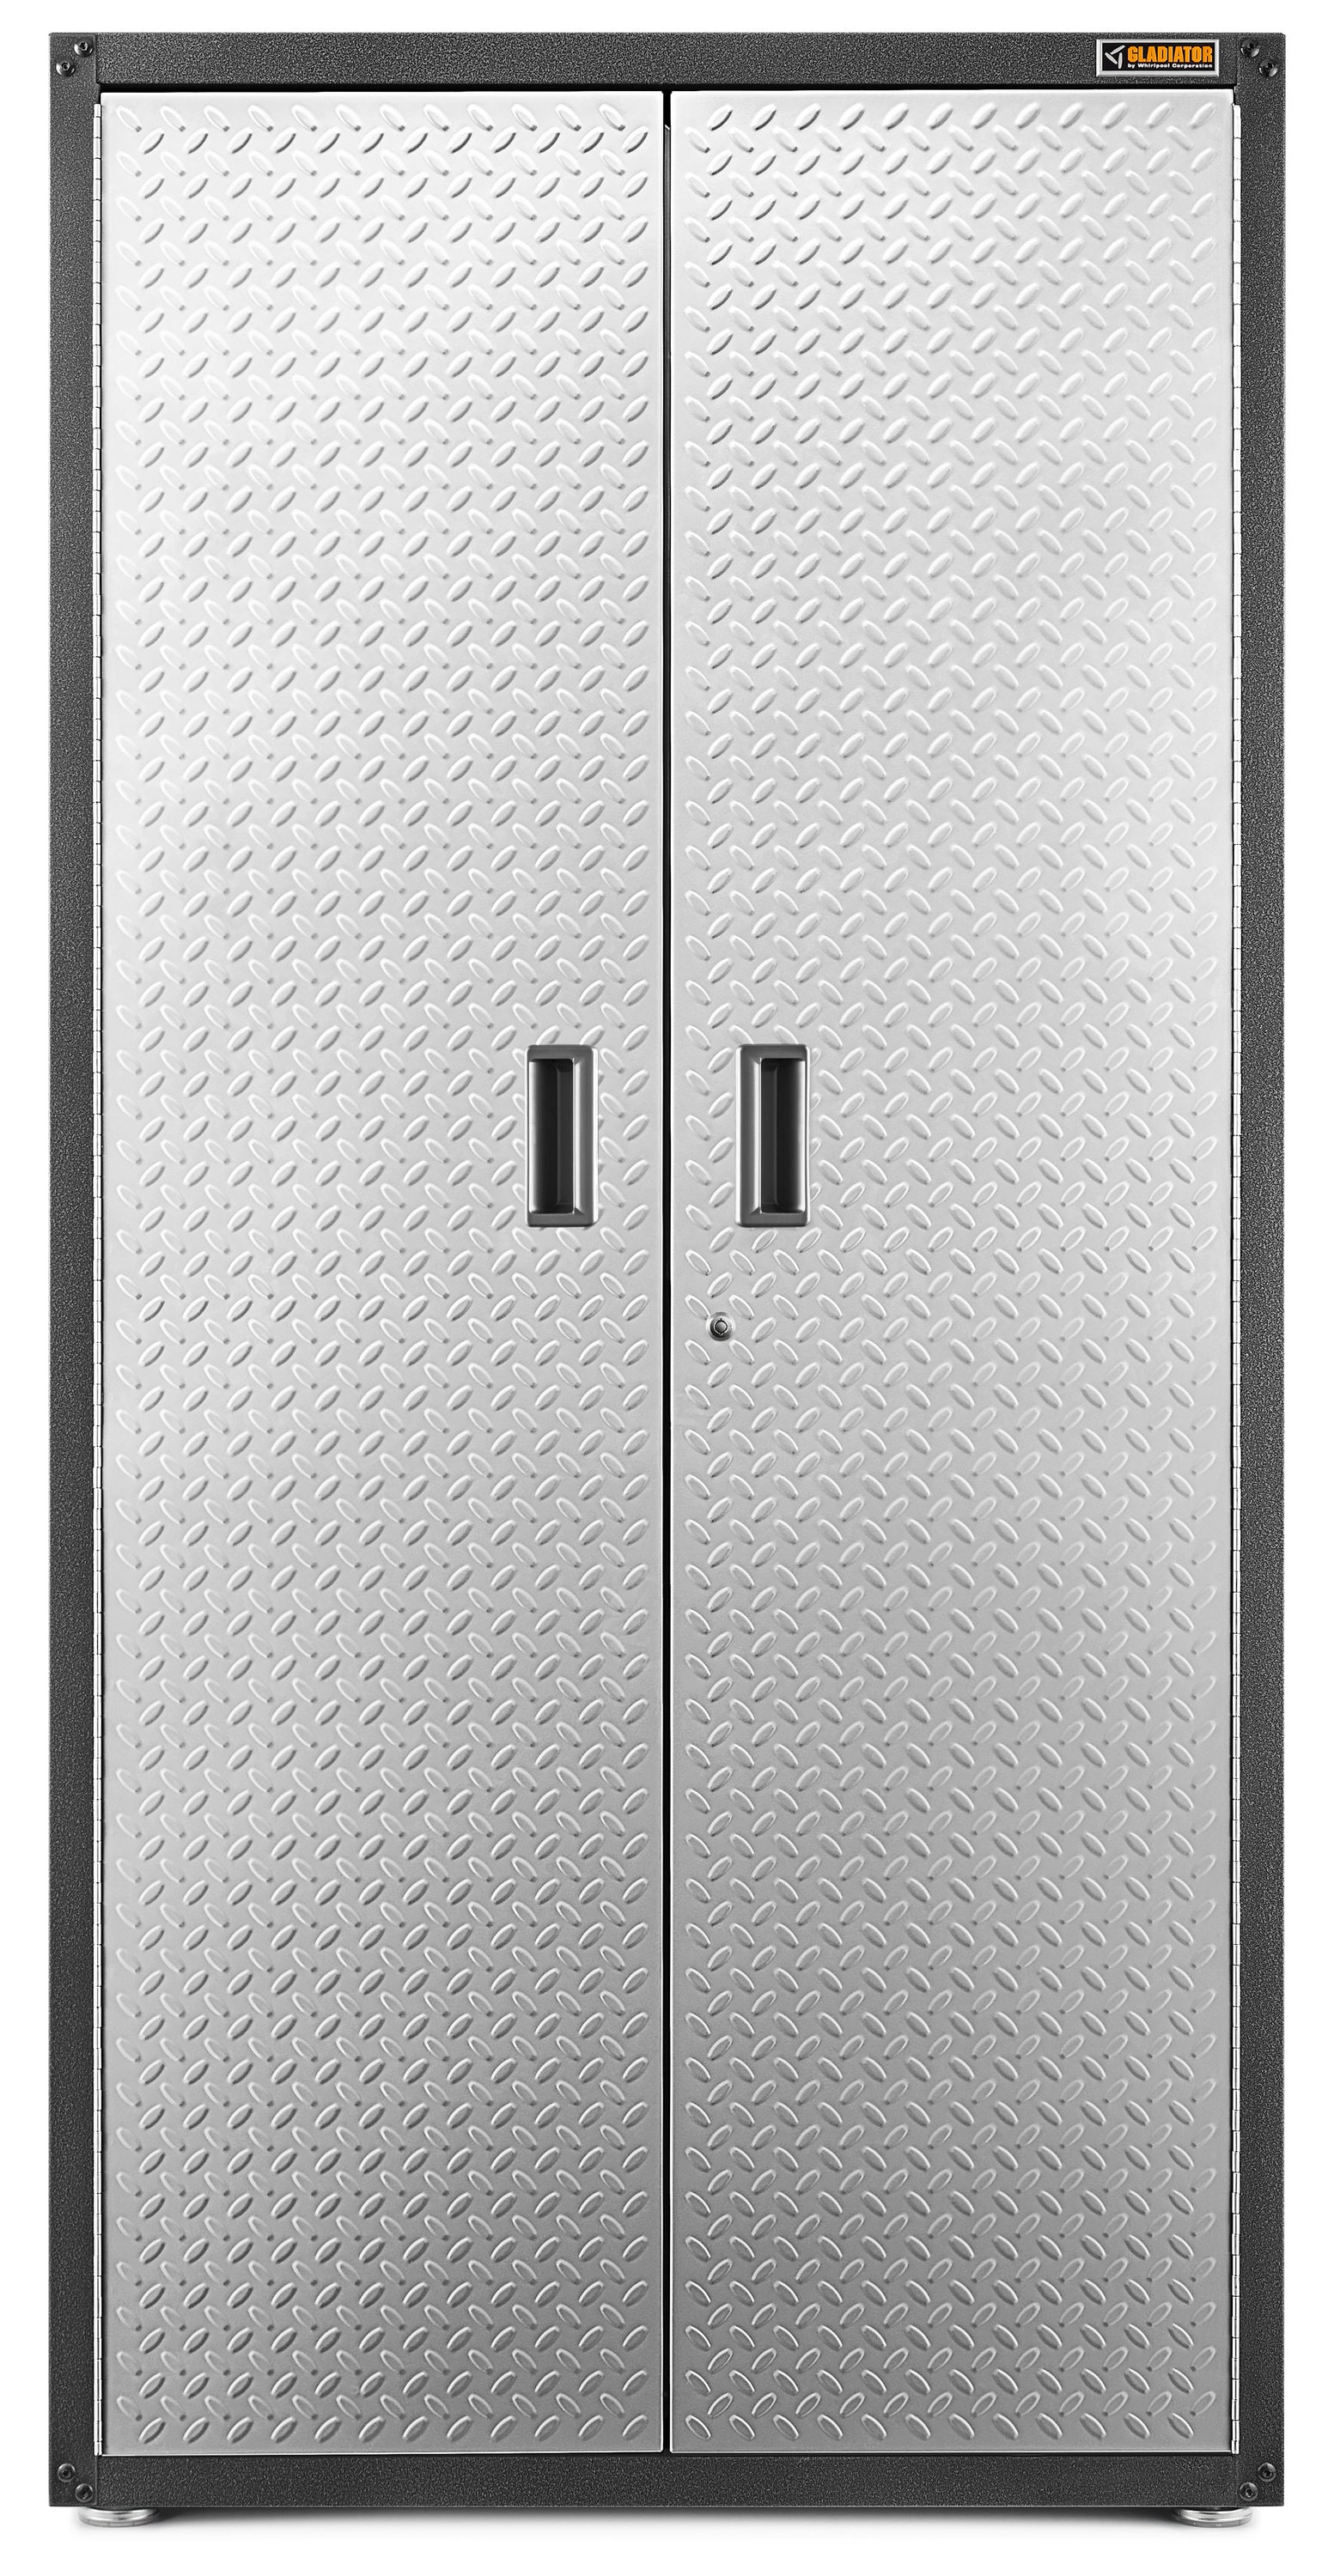 Gladiator Ready-to-Assemble Large GearBox Steel Freestanding or Wall-mounted Garage Cabinet in Gray (36-in W x 72-in H x 18-in D) on Sale At Lowe's